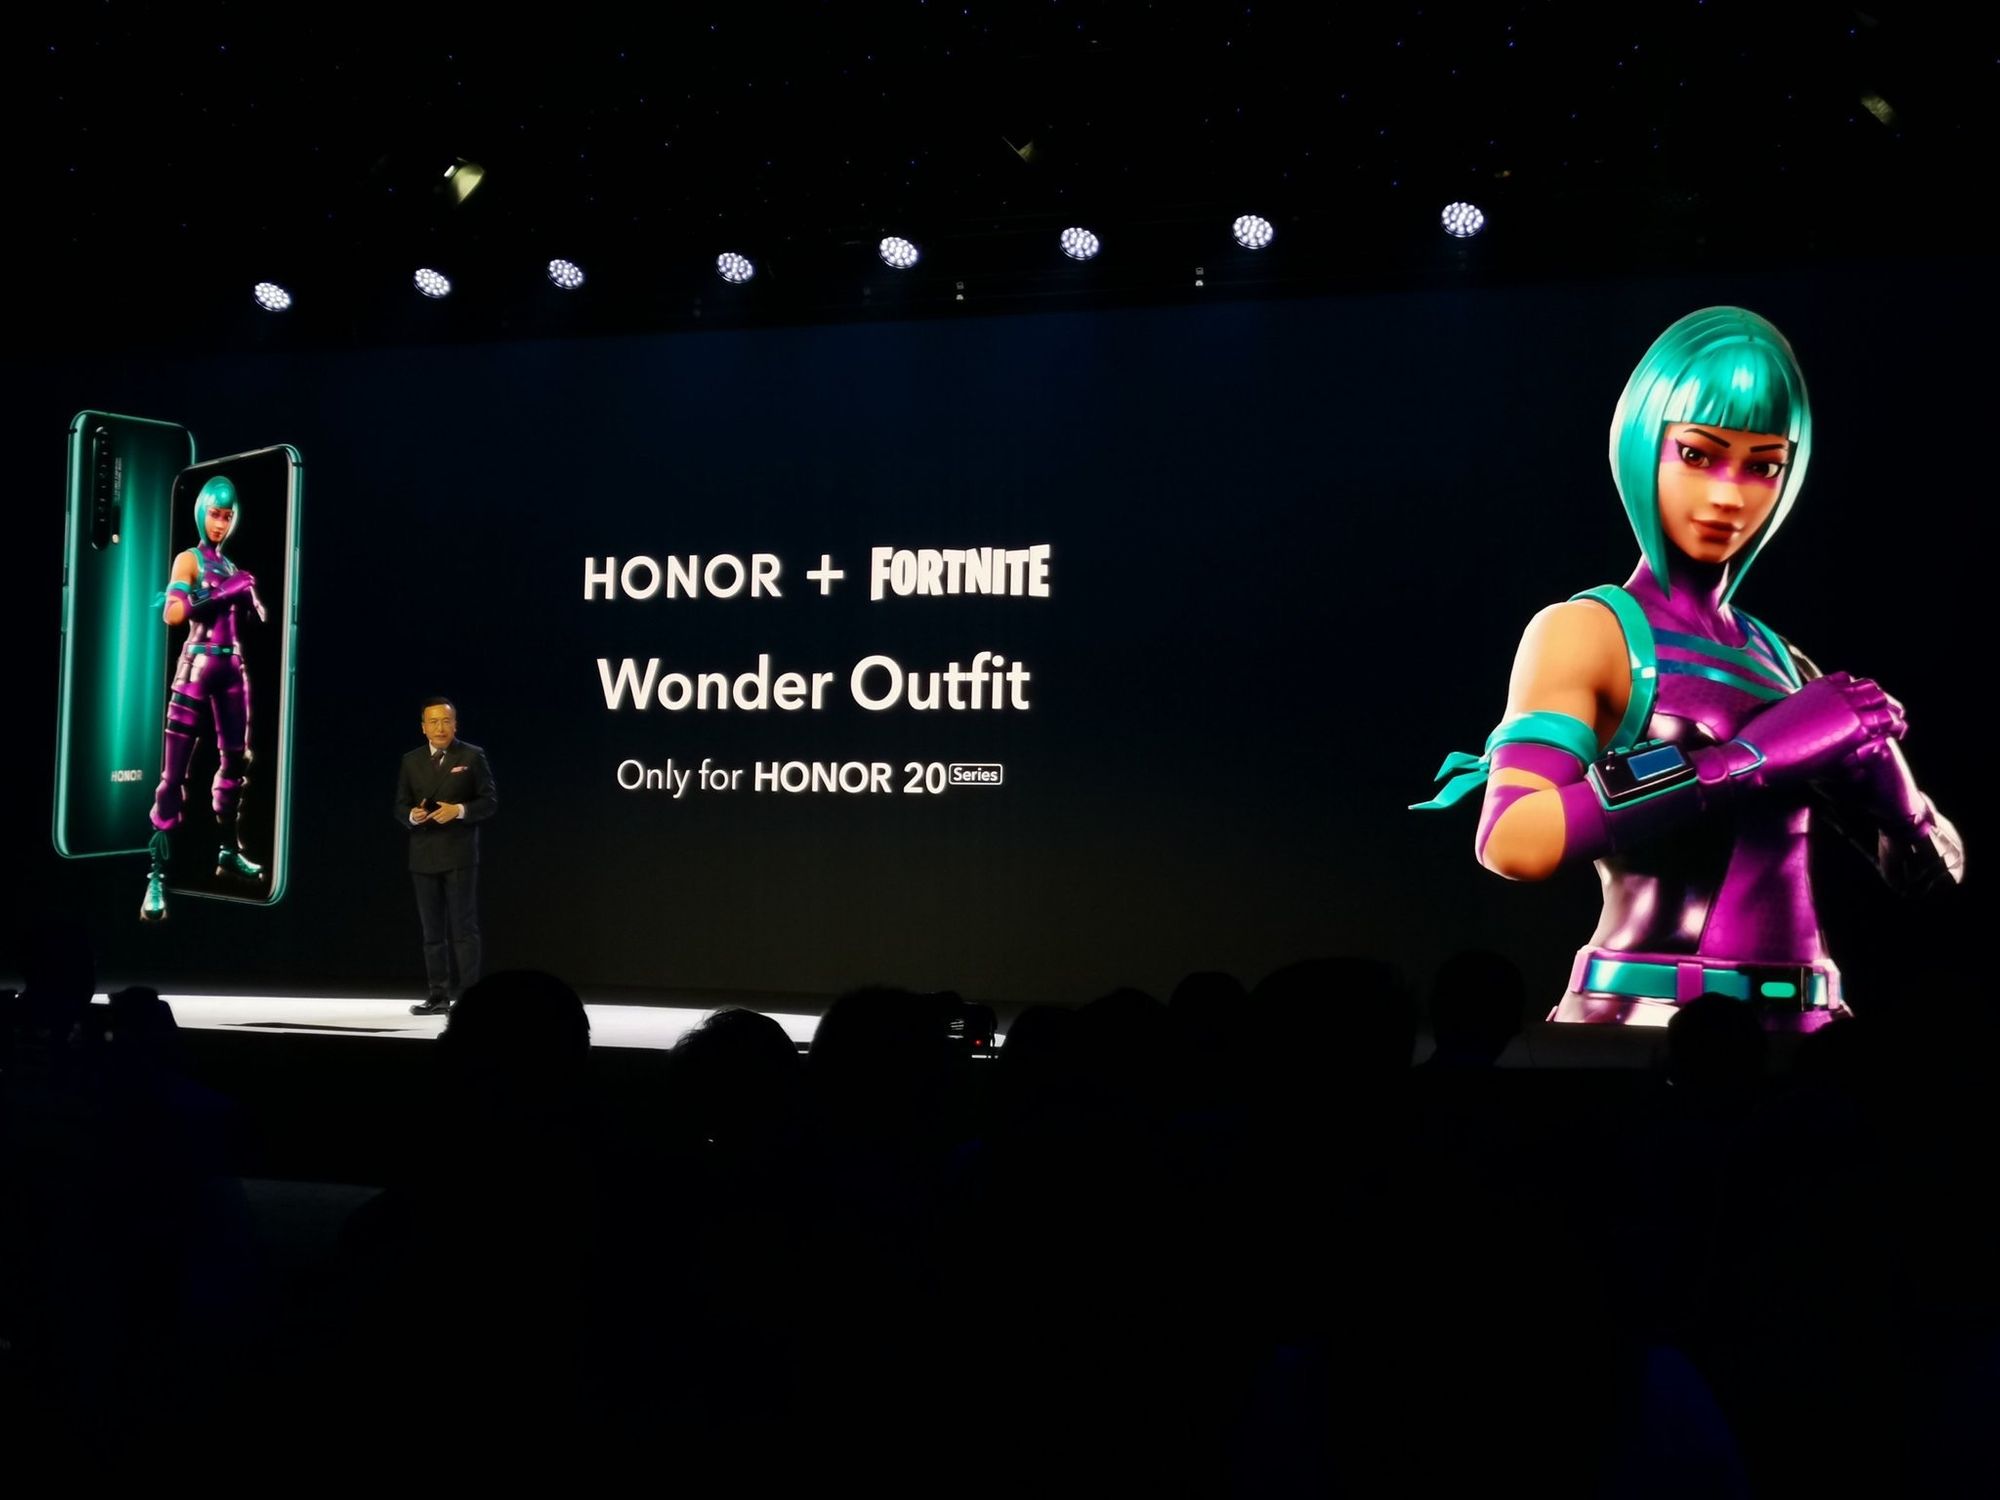 Exclusive Wonder Outfit Announced for Fortnite